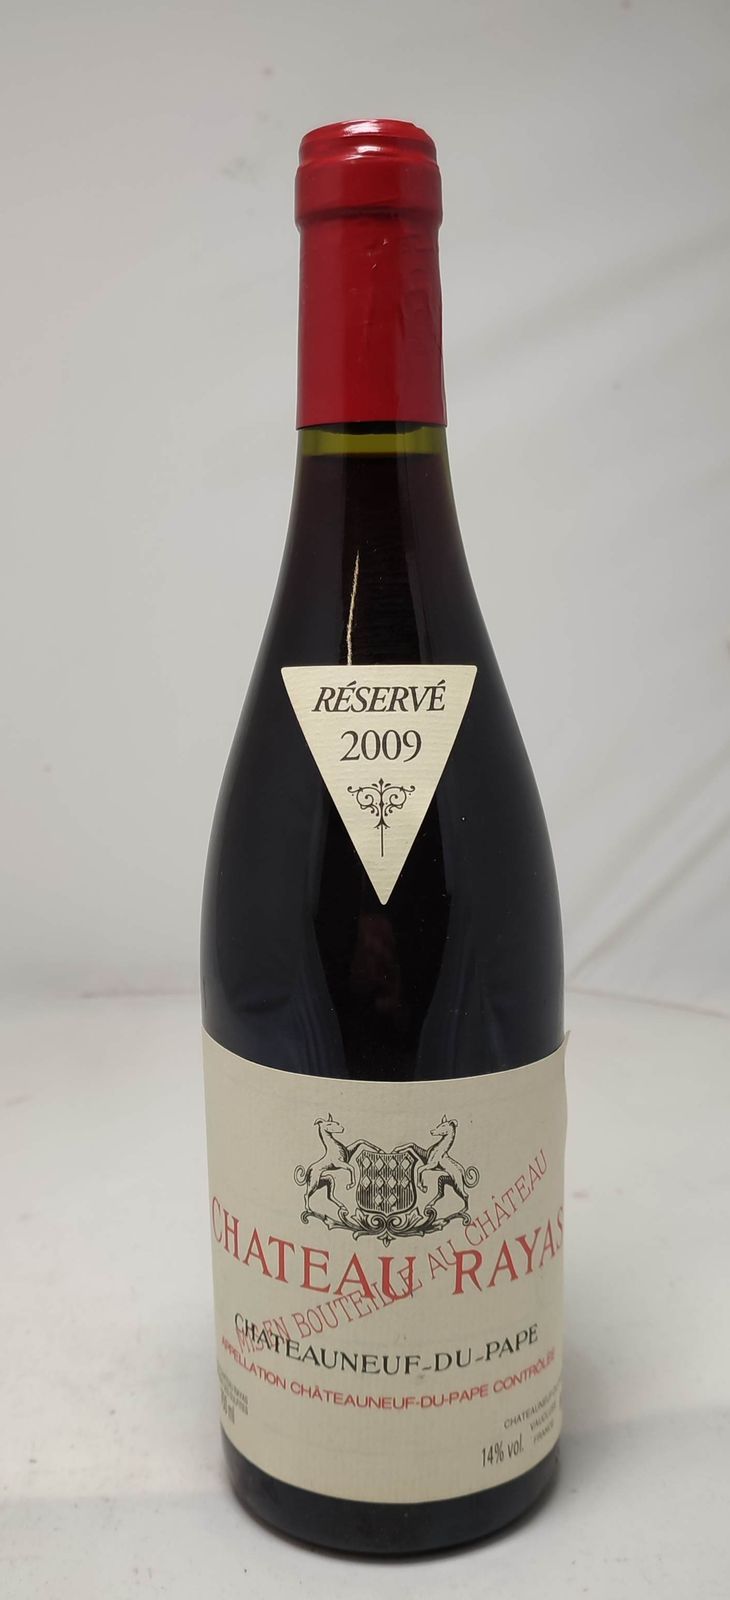 Null 1 B CHÂTEAU RAYAS red.2009年教皇新堡葡萄酒（Chateauneuf-du-Pape